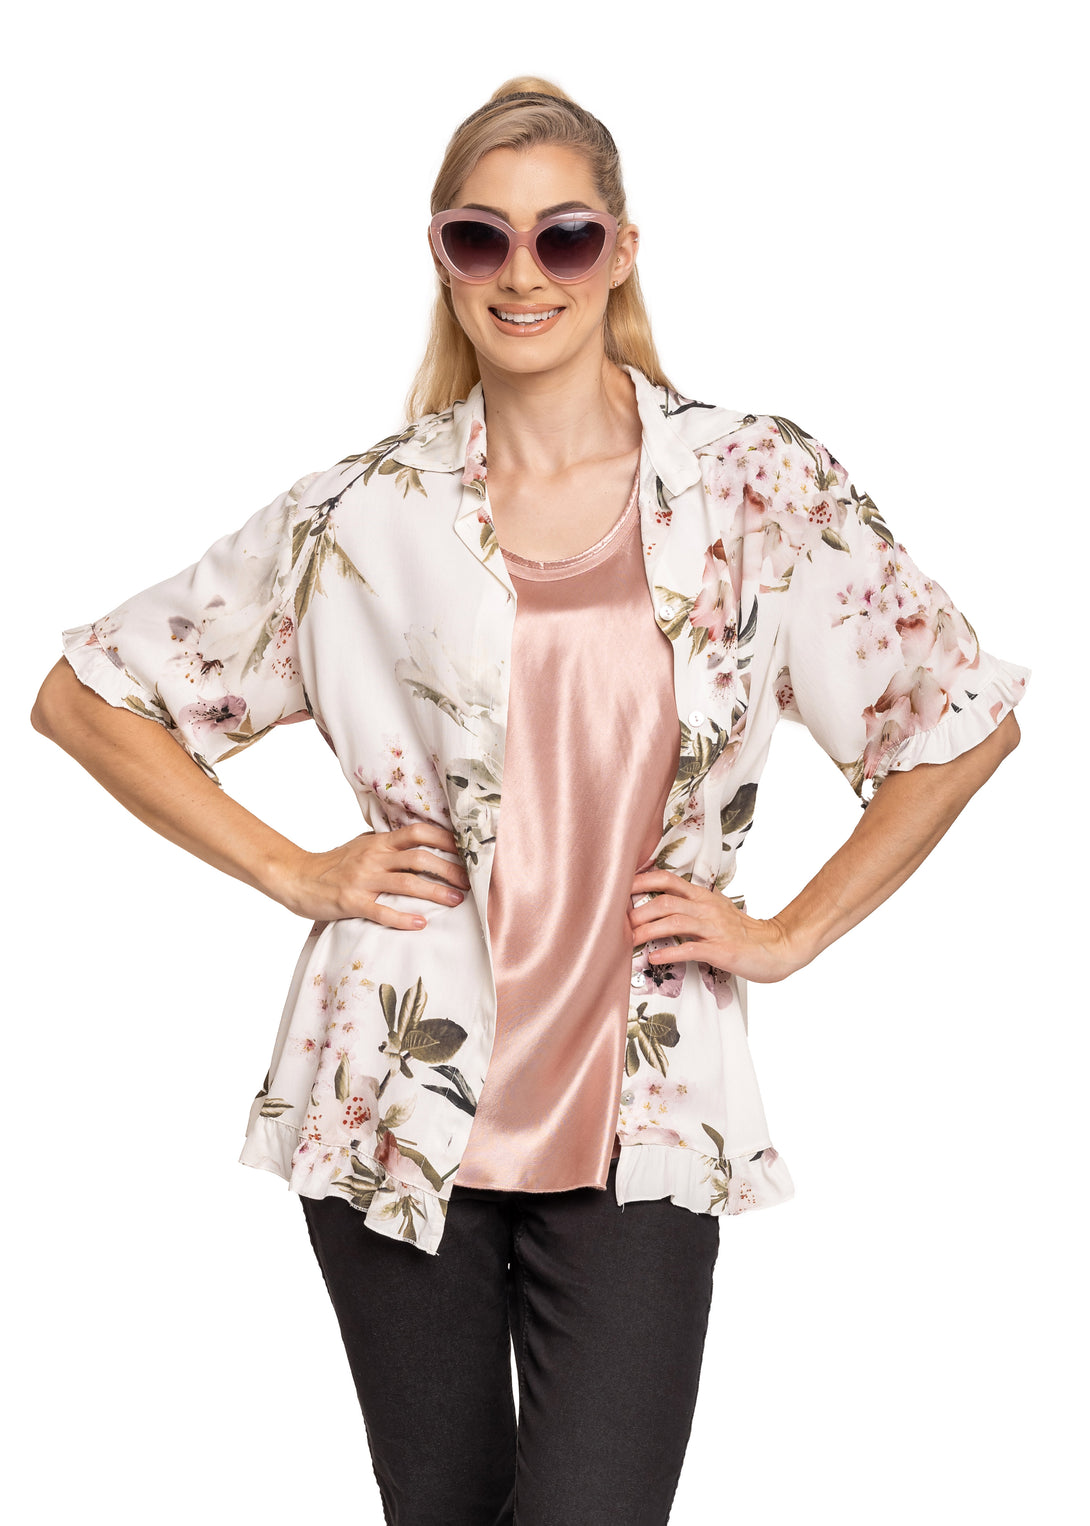 Floral Print Adira Top elbow length sleeve ending in a frill and buttons down the front.